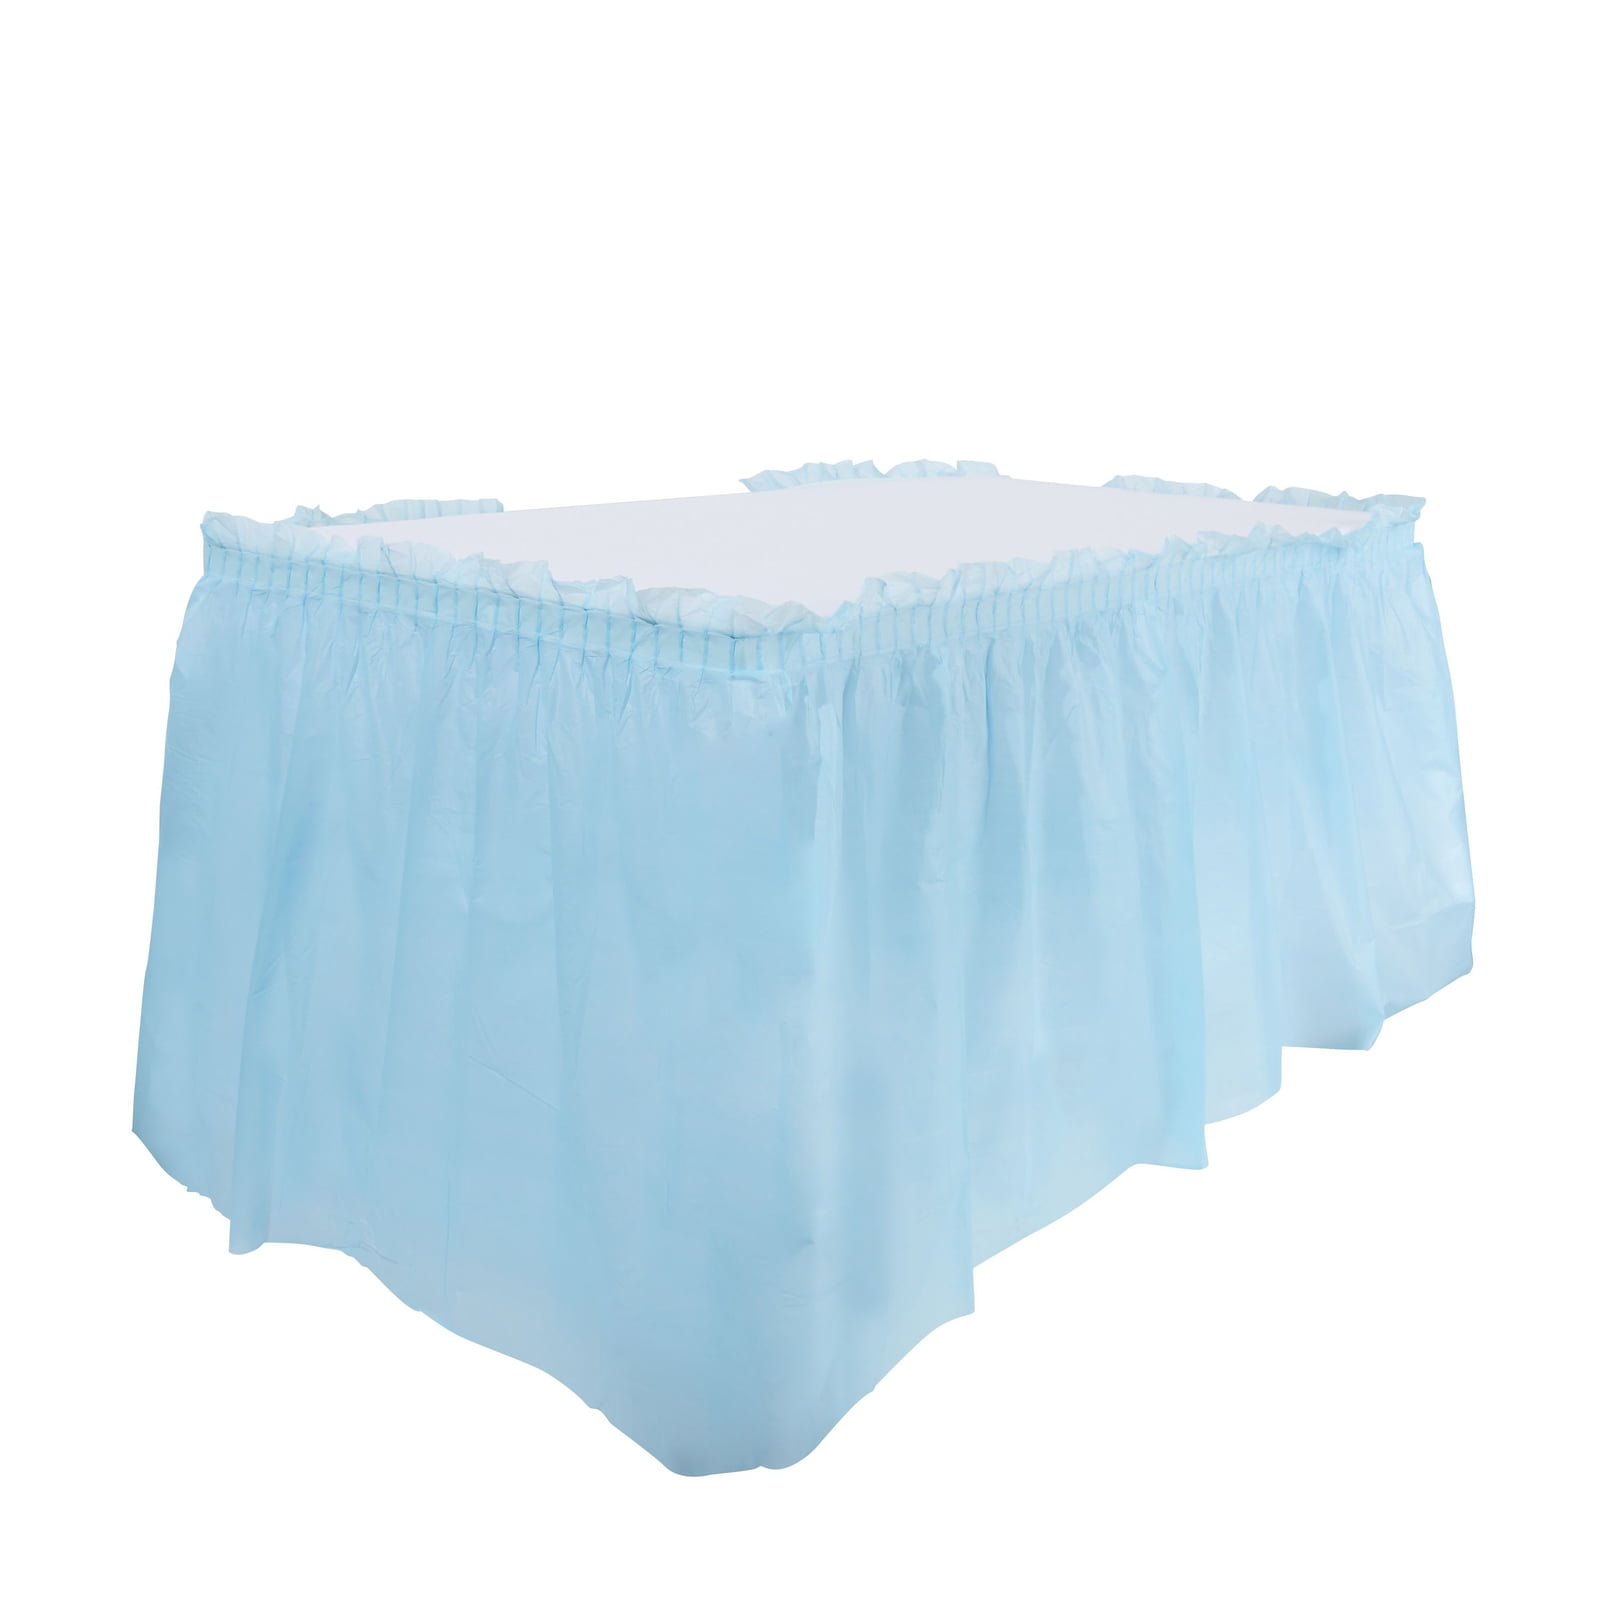 Aqua Dreampartycreation Party Table Skirt 14 ft x 29 Pleated Plastic Disposable Waterproof Table Skirt